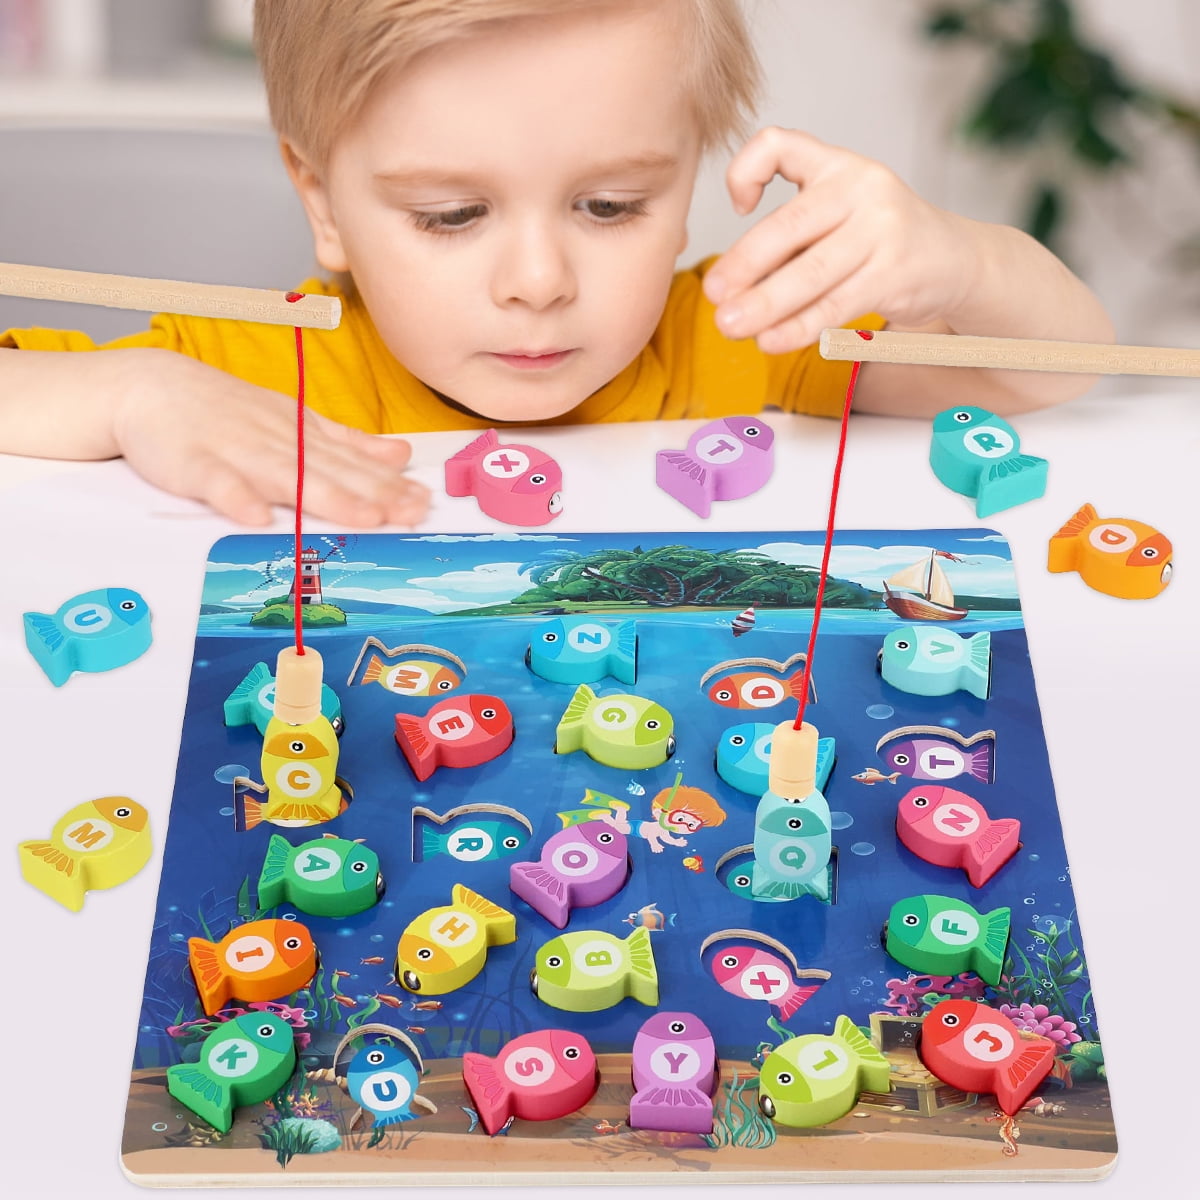 Dcenta Wooden Magnetic Fishing Game Montessori Number & Letter Cognition  Fine Motor Training Preschool Education for Boys & Girls Age 3+